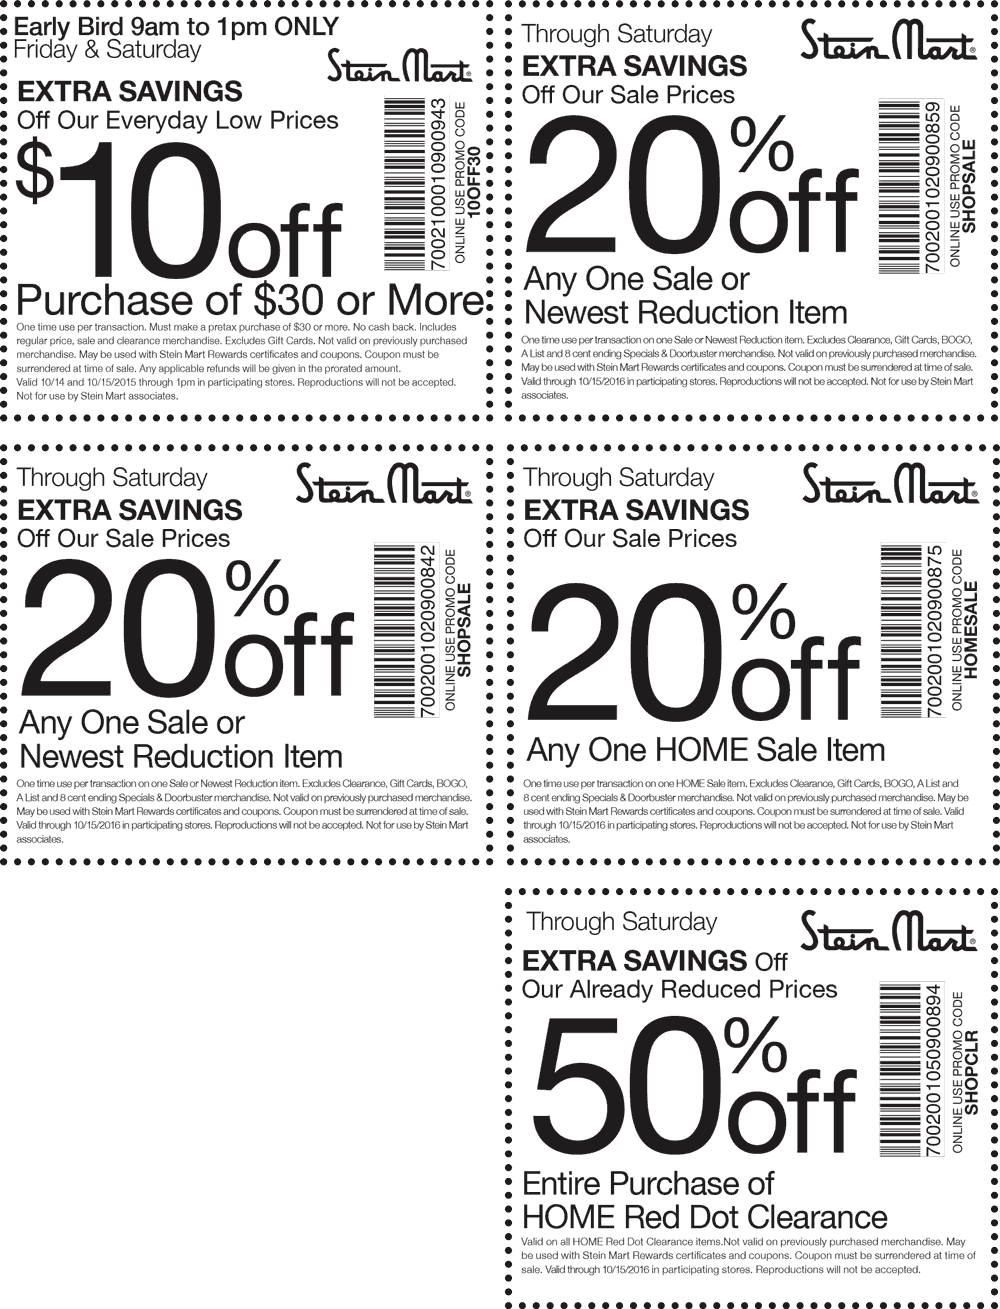 Stein Mart February 2020 Coupons and Promo Codes